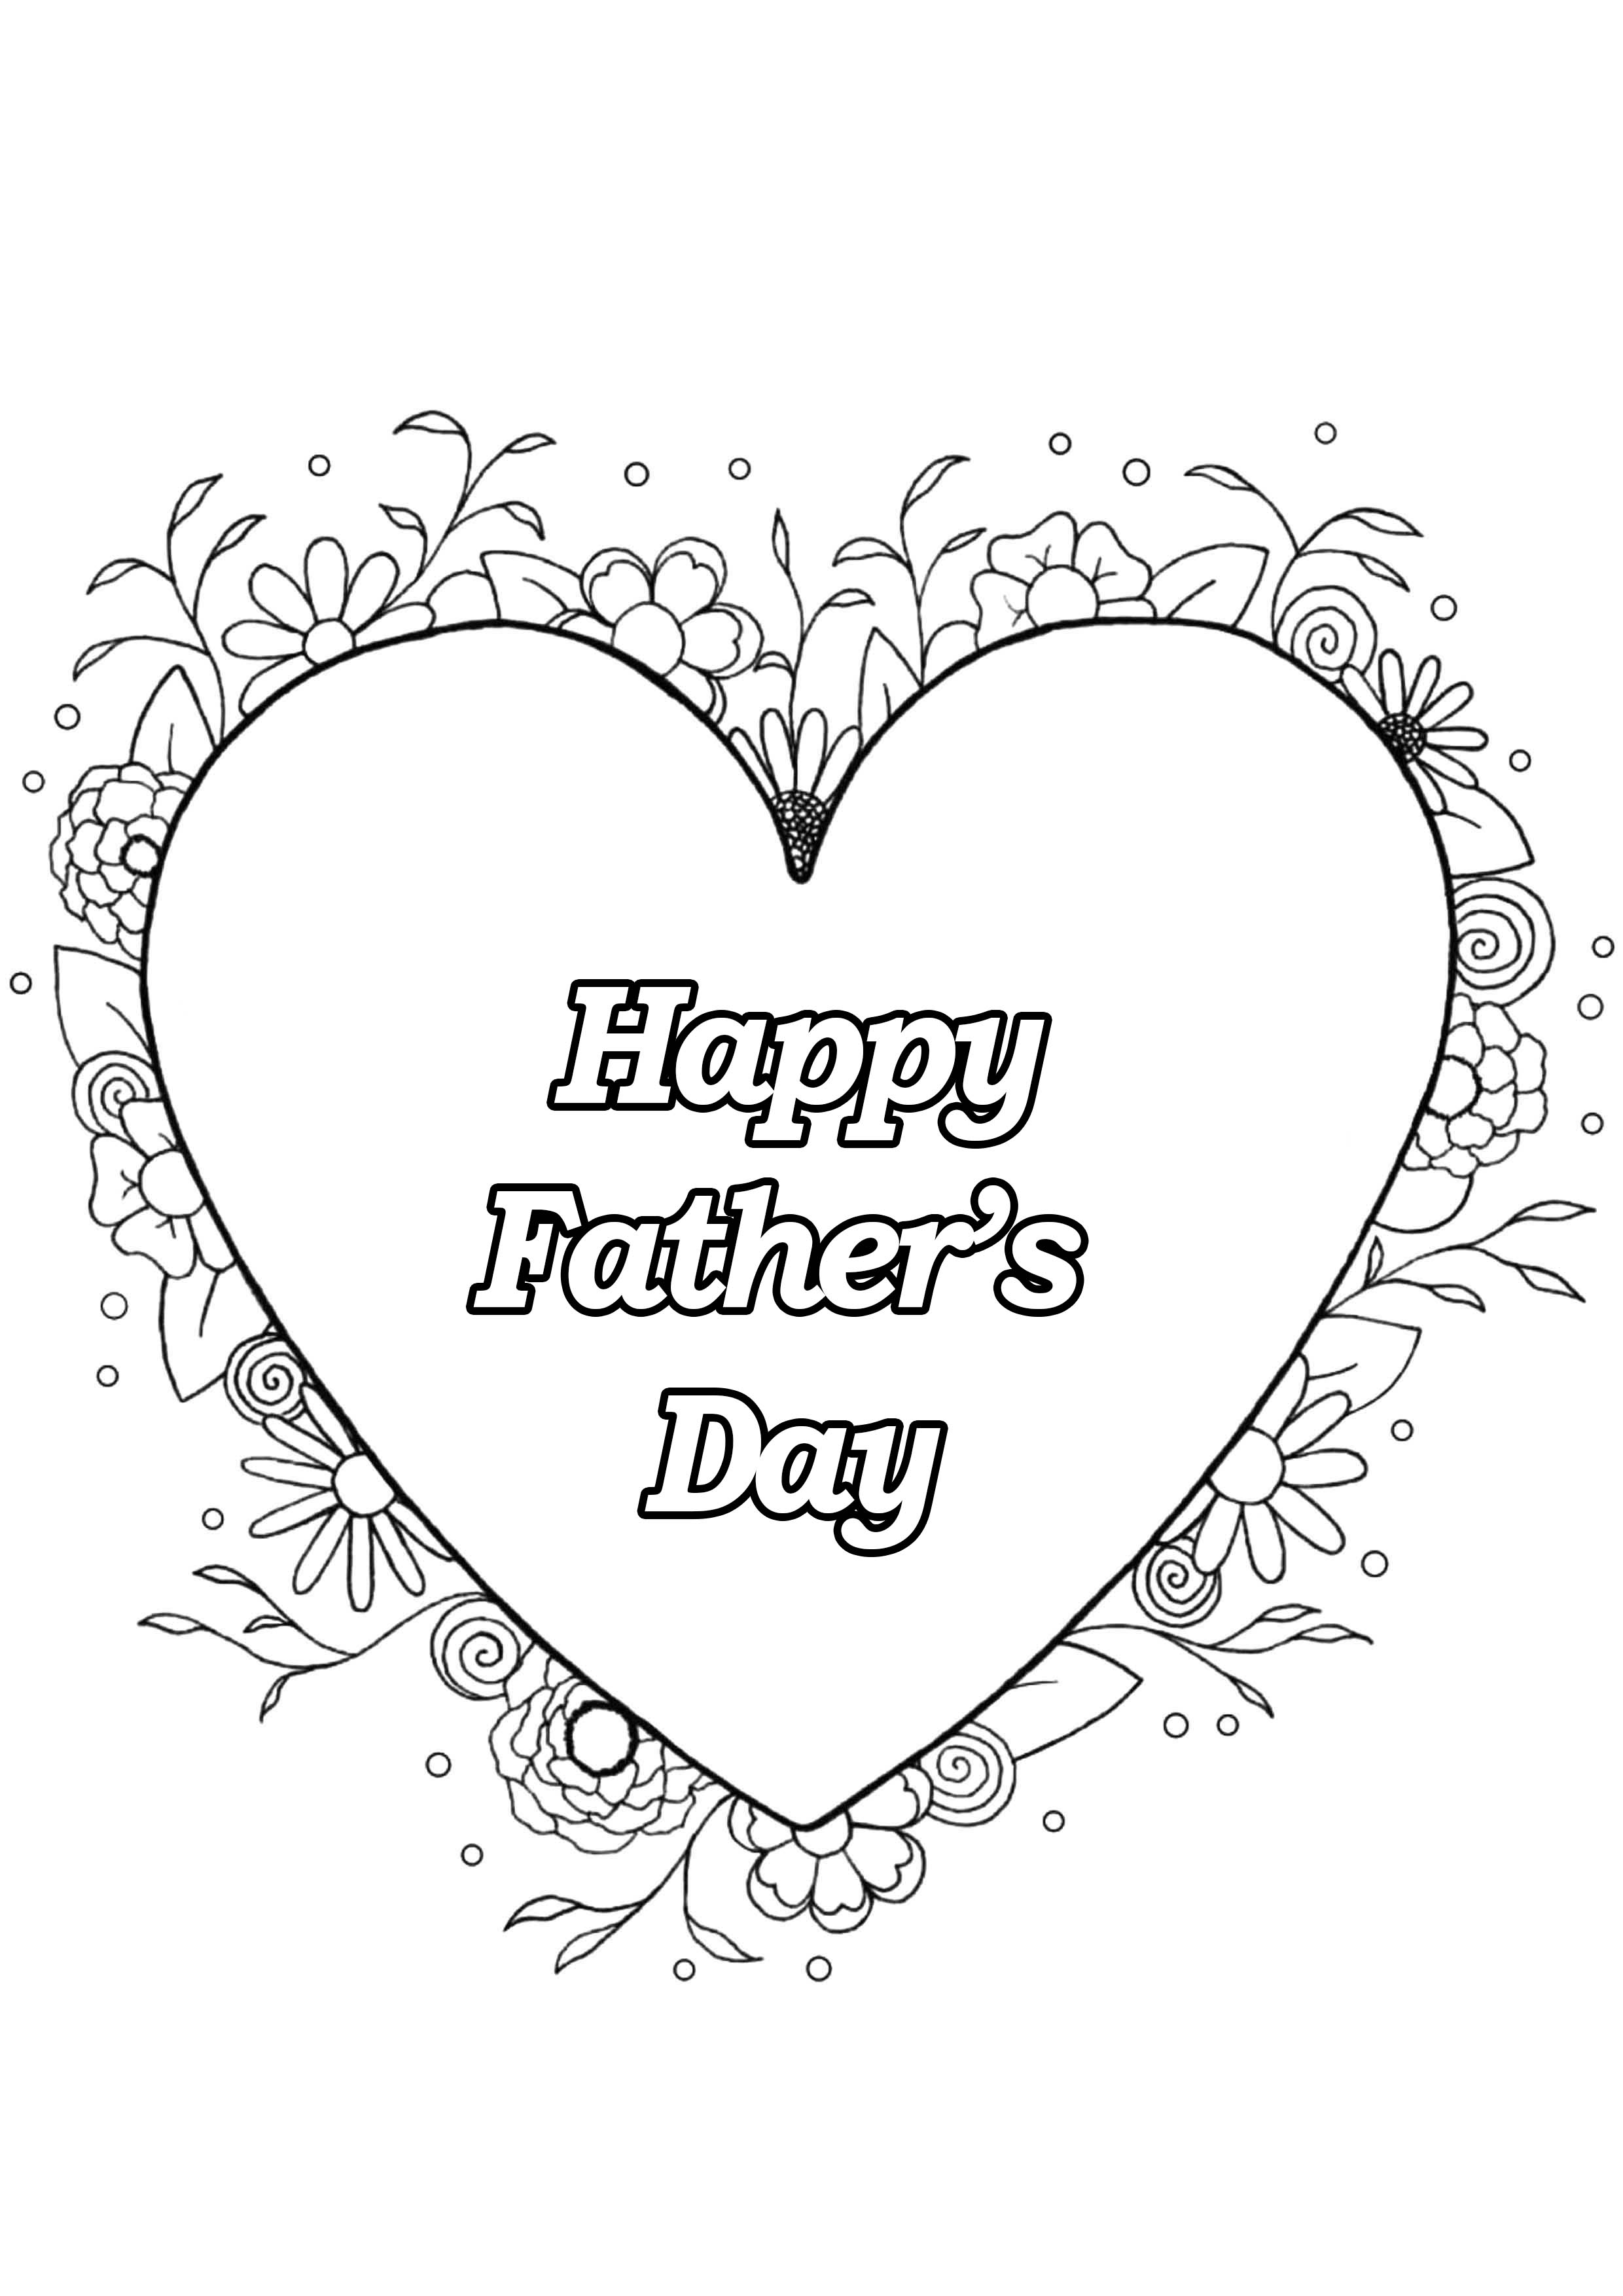 happy-father-s-day-coloring-page-kids-coloring-pages-vrogue